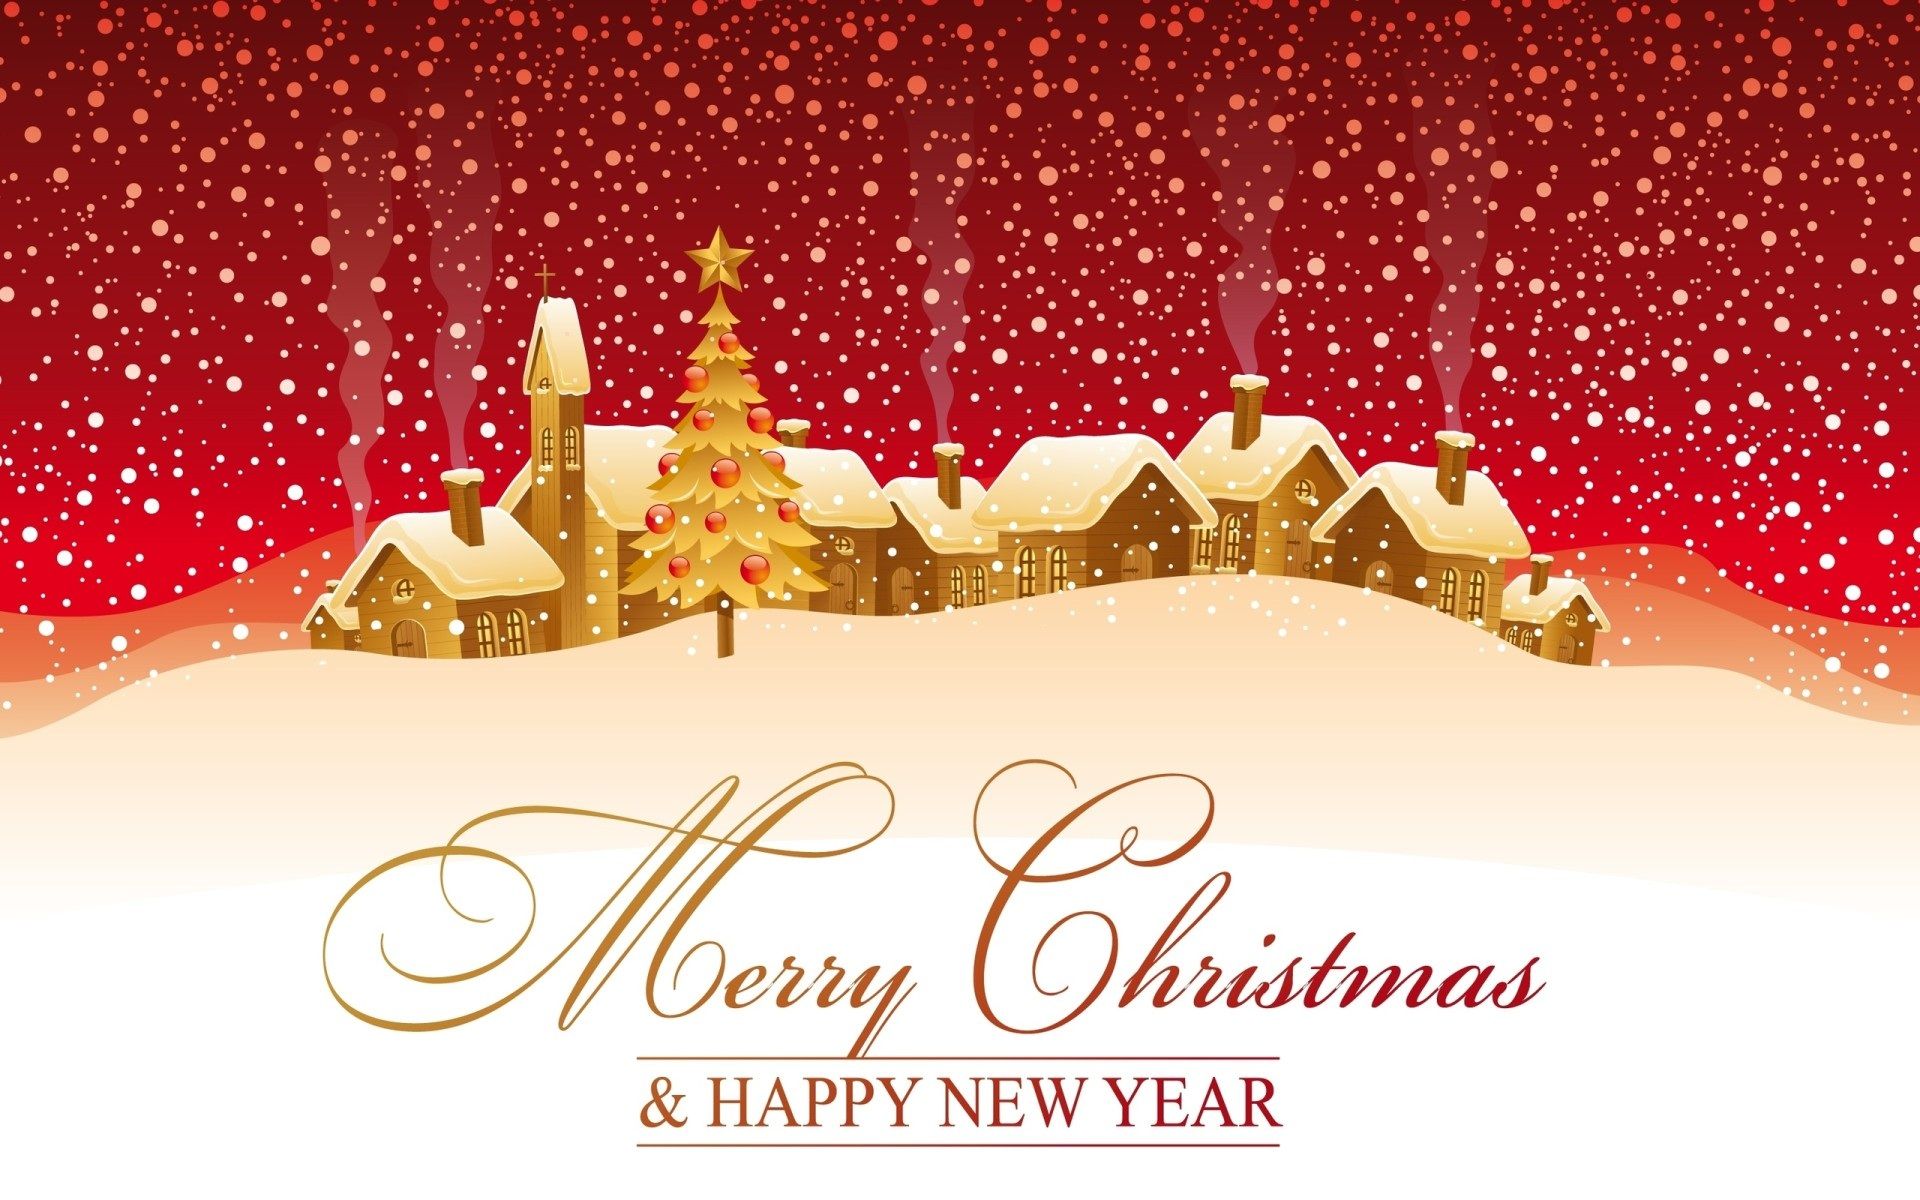 Merry Christmas and Happy New Year. Merry christmas card greetings, Merry christmas picture, Happy new year wallpaper